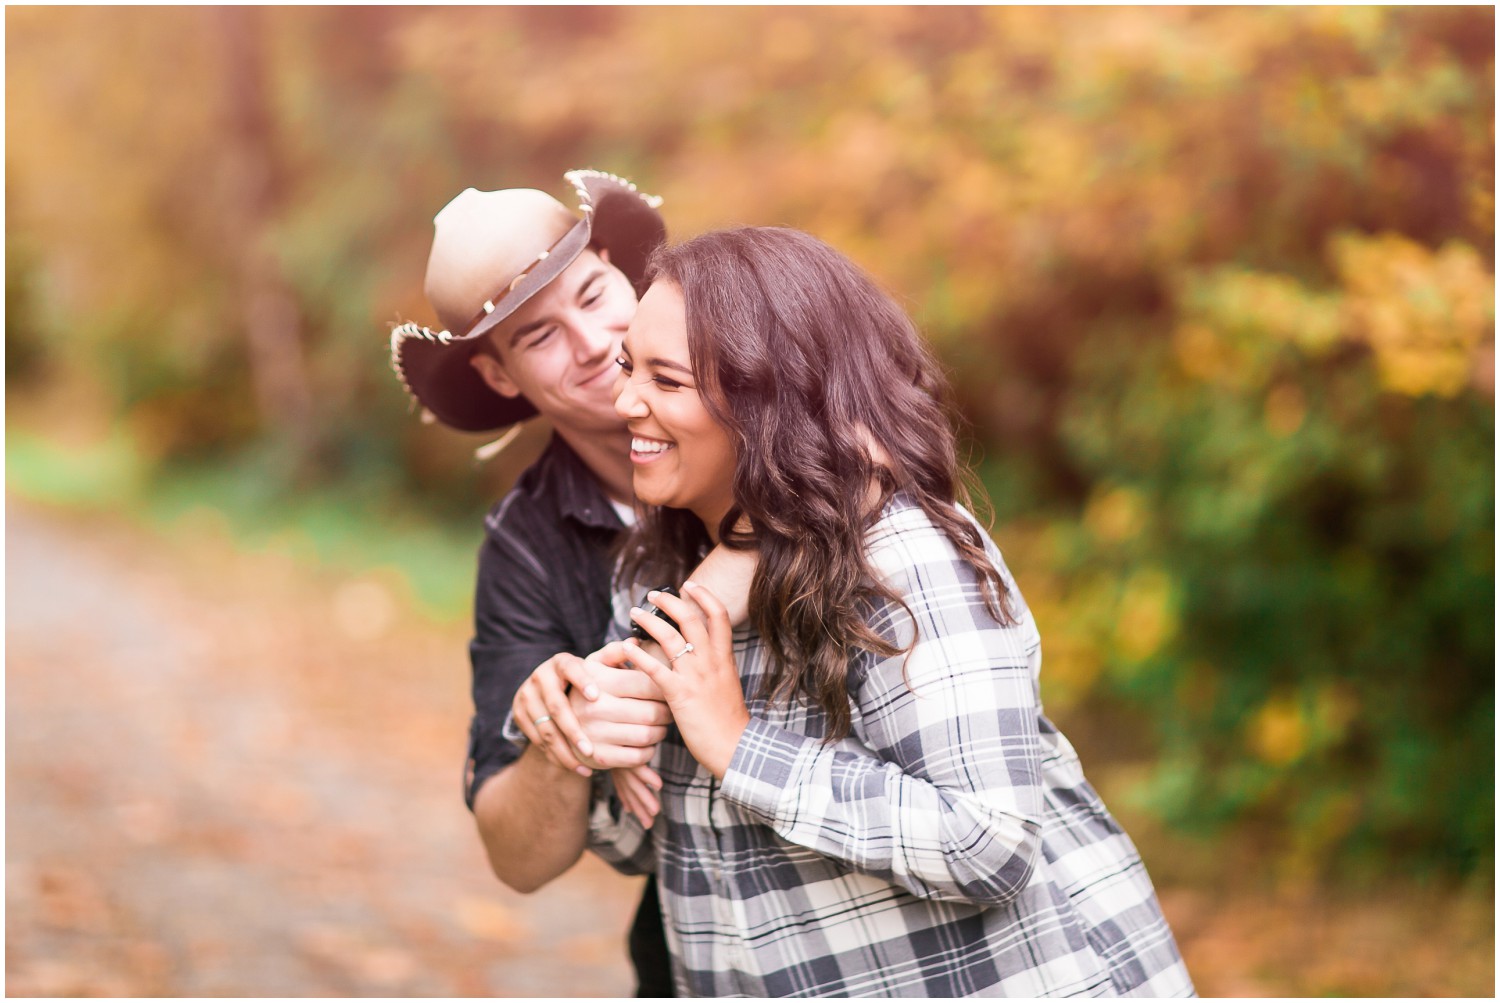 A Colorful Fall Engagement Session at Tolt MacDonald Park